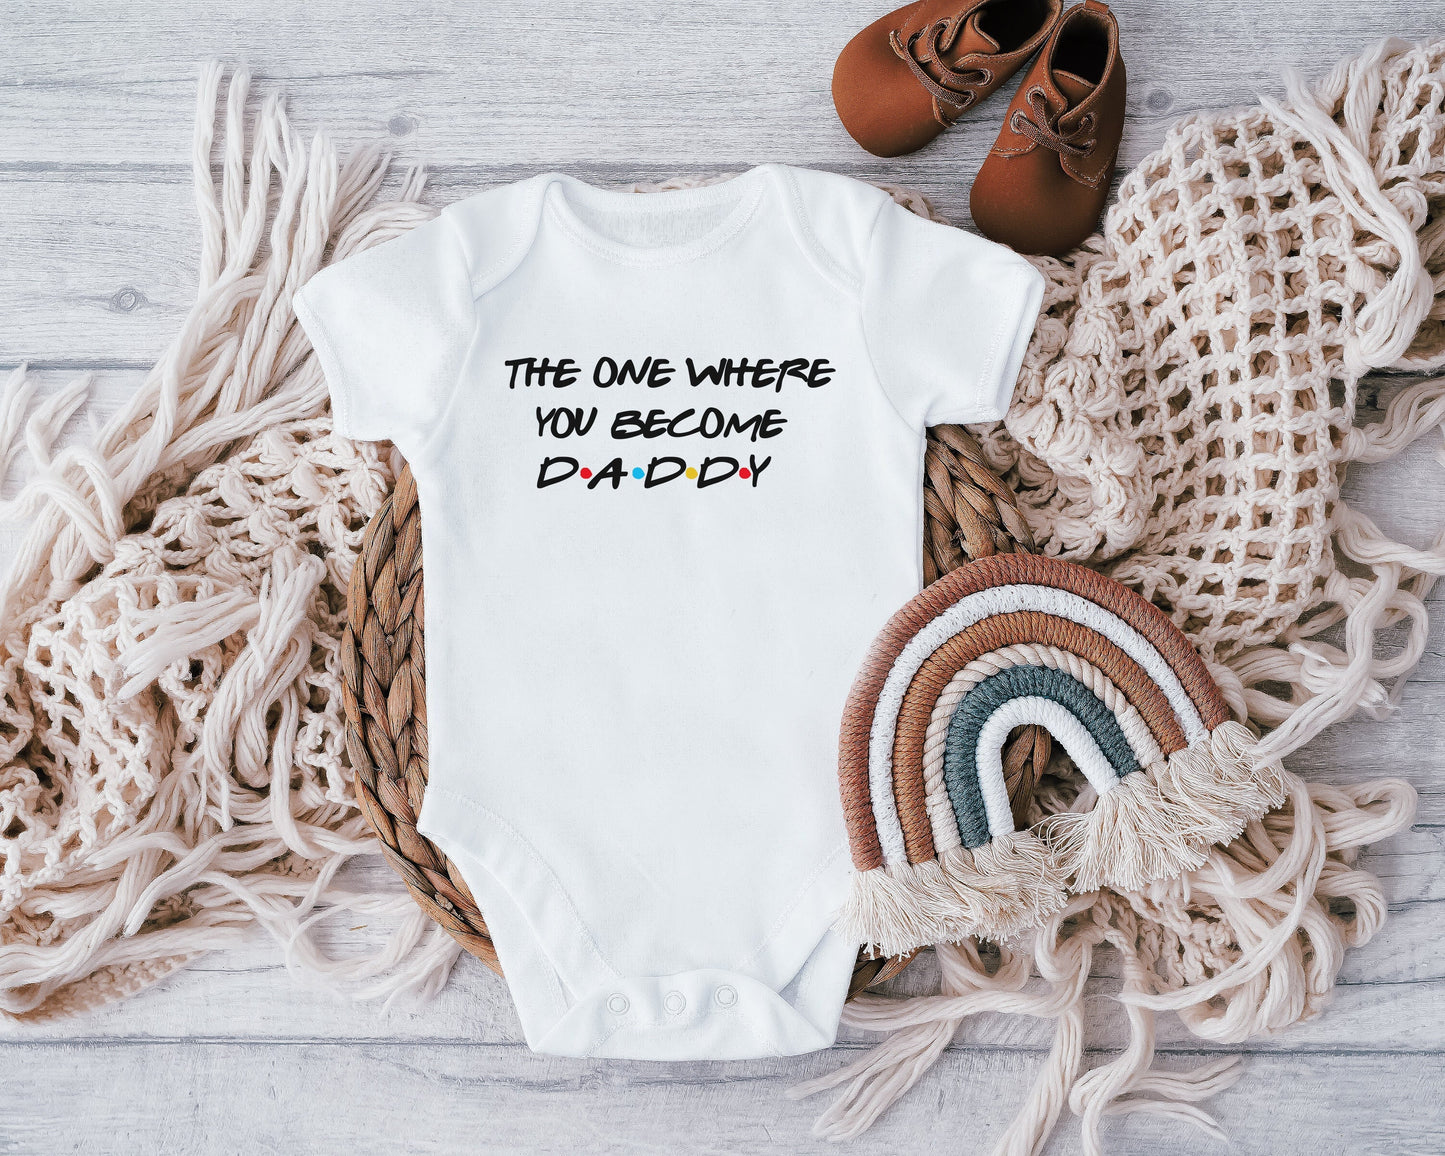 The One Where You Become Daddy bodysuit, New Baby Announcement, Baby Shower Gift, Pregnancy Announcement For Dad, Pregnancy Surprise